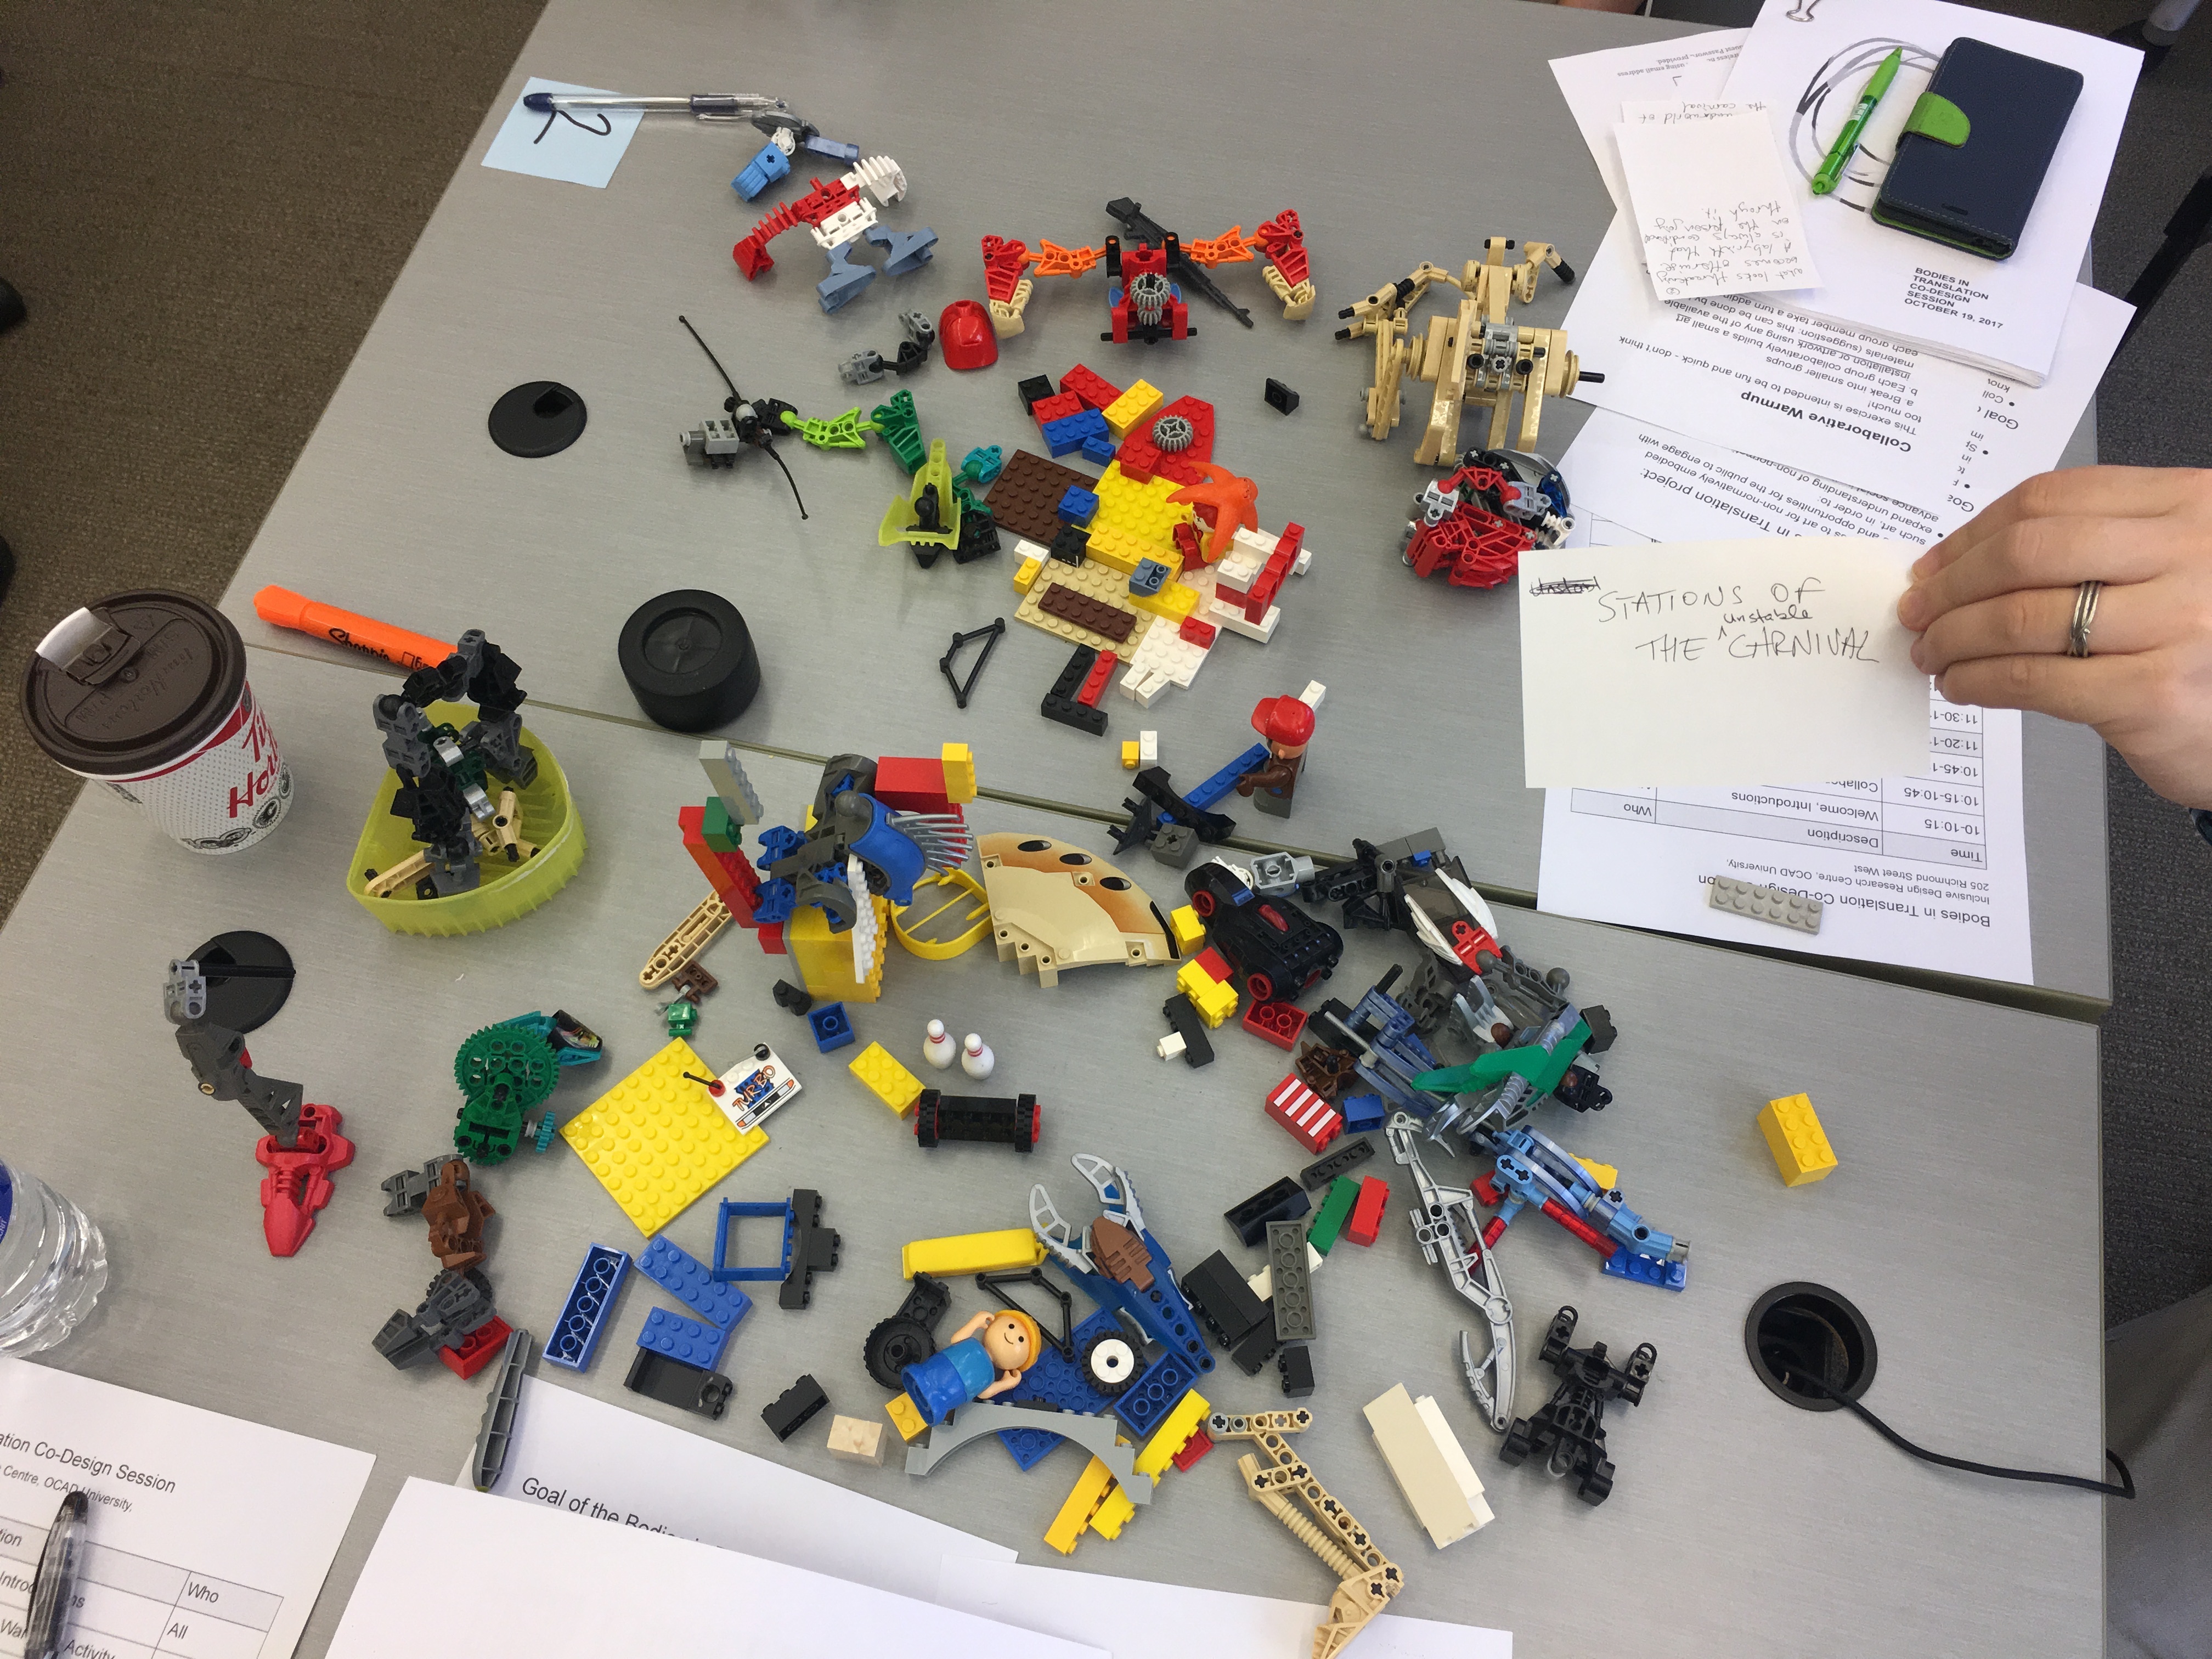 Photo of a desktop filled with various lego constructions. A hand can be seen on the right side holding up a note that says "Stations of the Unstable Carnival"